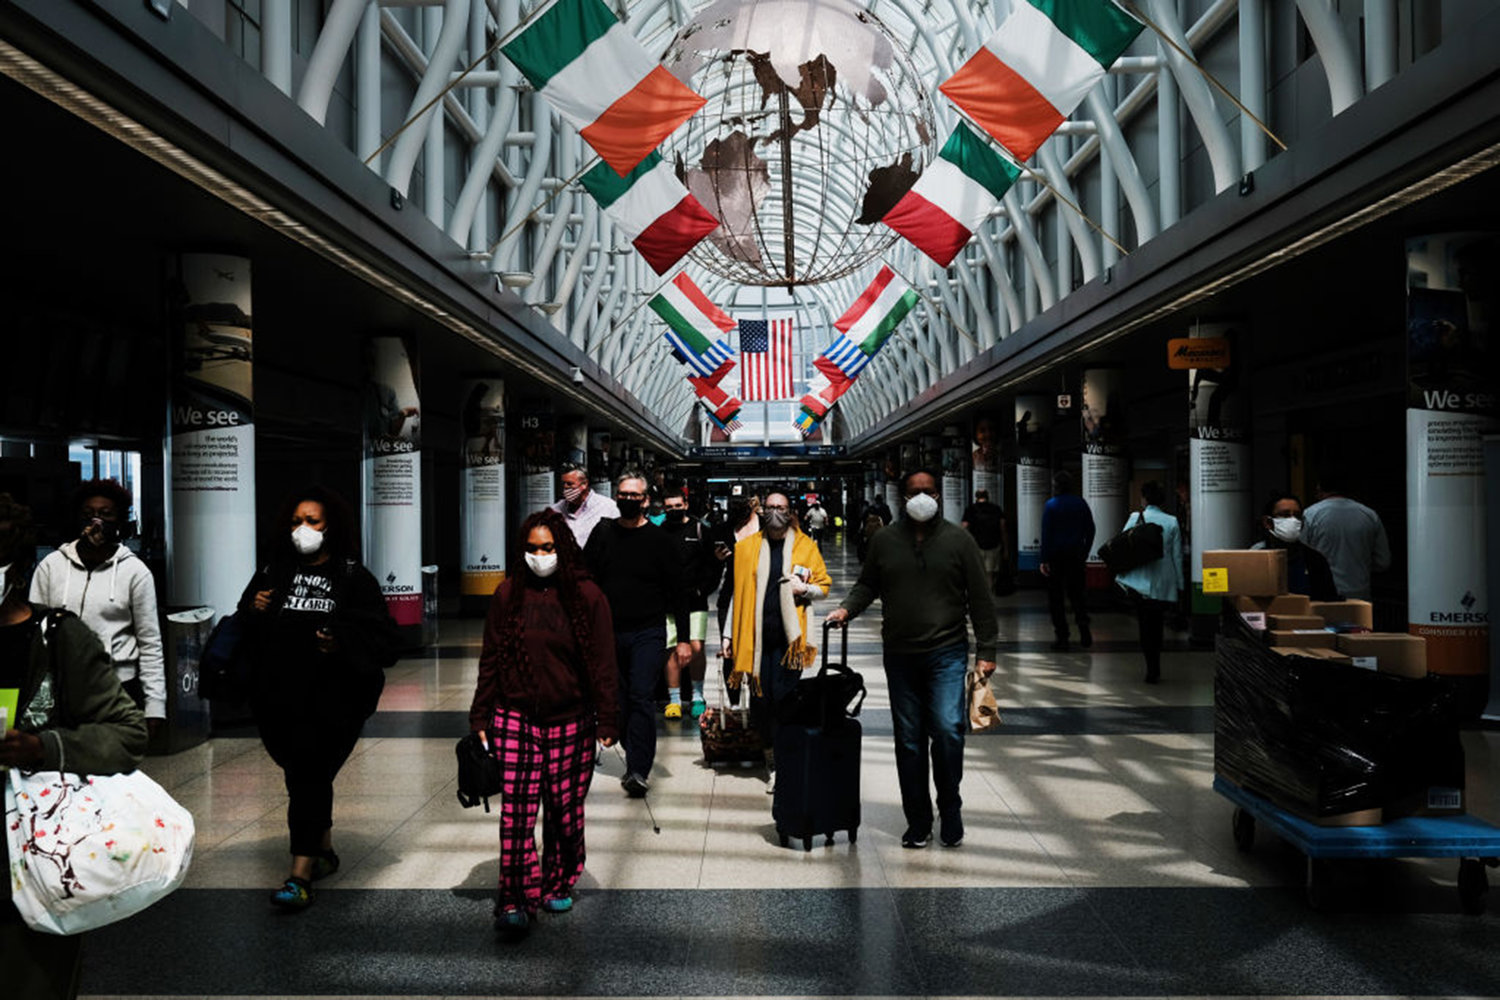 People walk through Chicago O’Hare airport on April 26, 2021 in Chicago, Illinois.